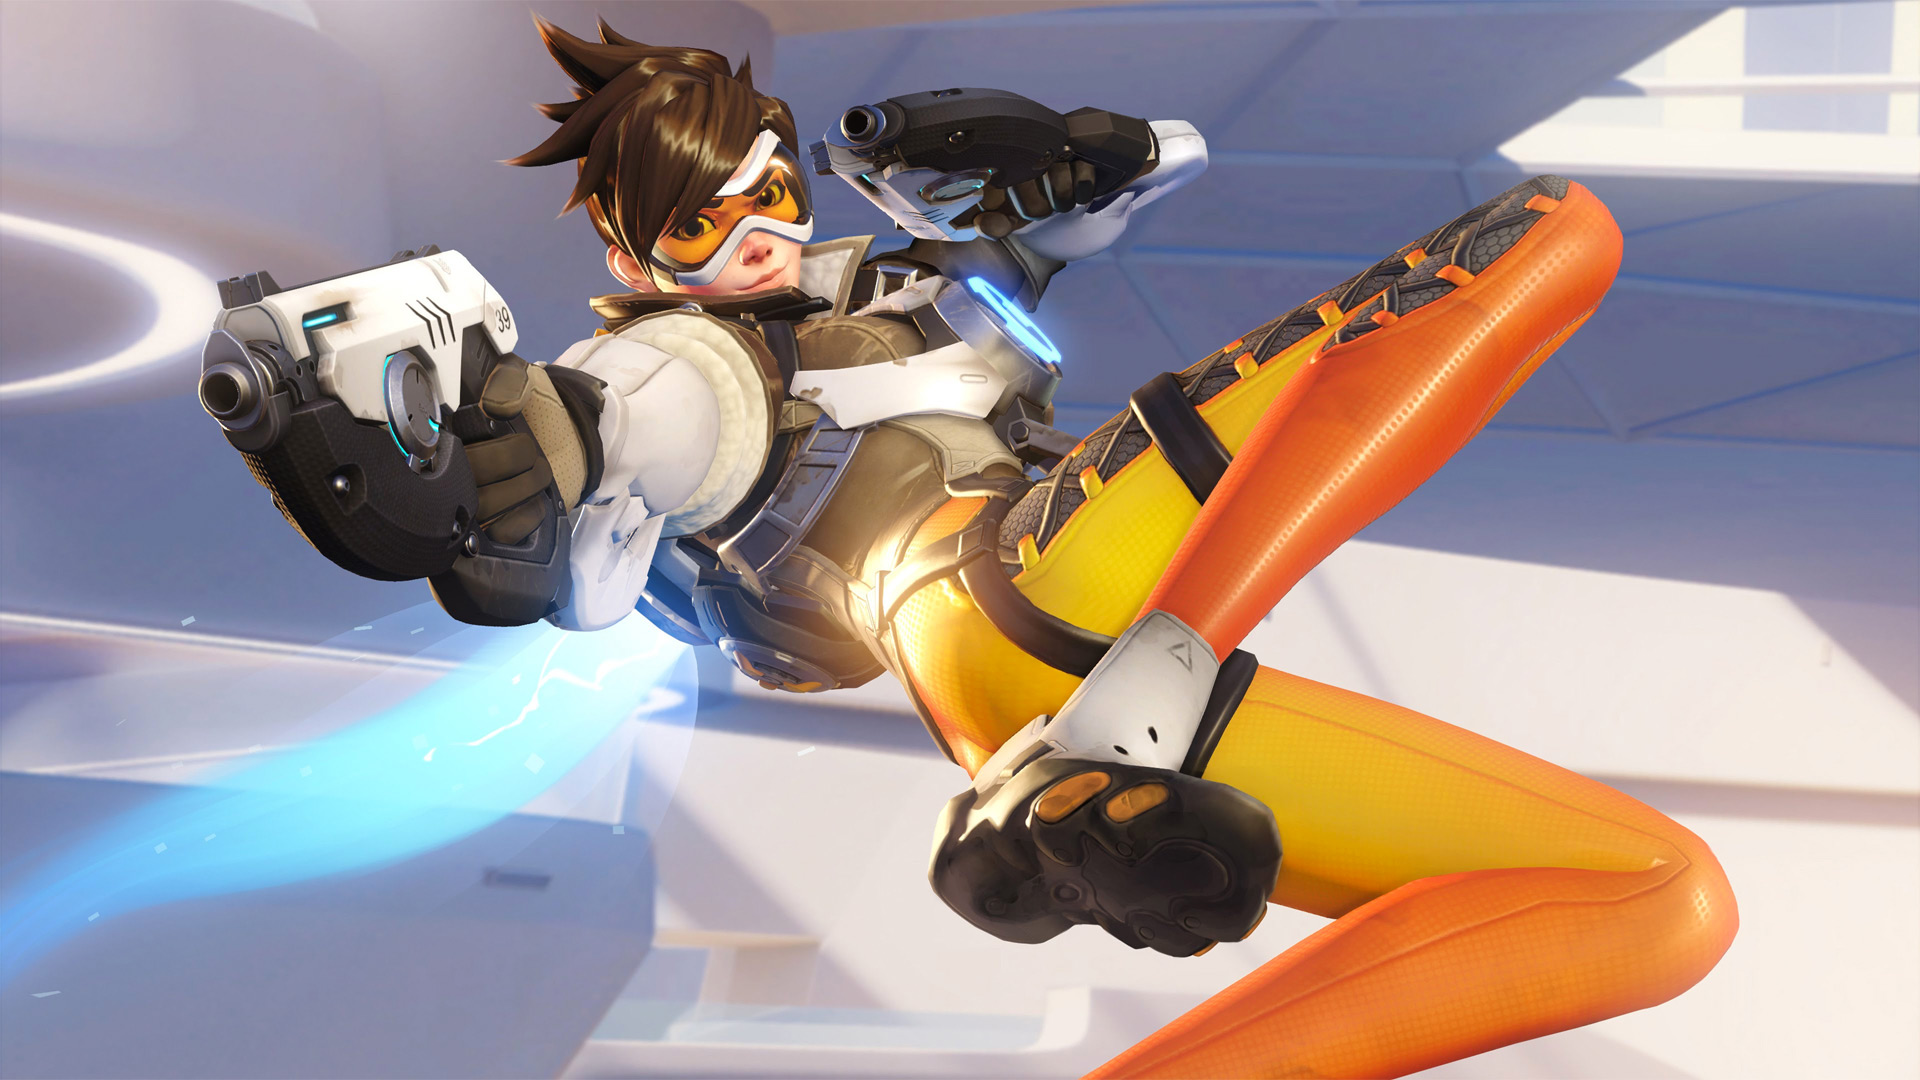 Report: Coca-Cola and State Farm step away from Overwatch League sponsorship